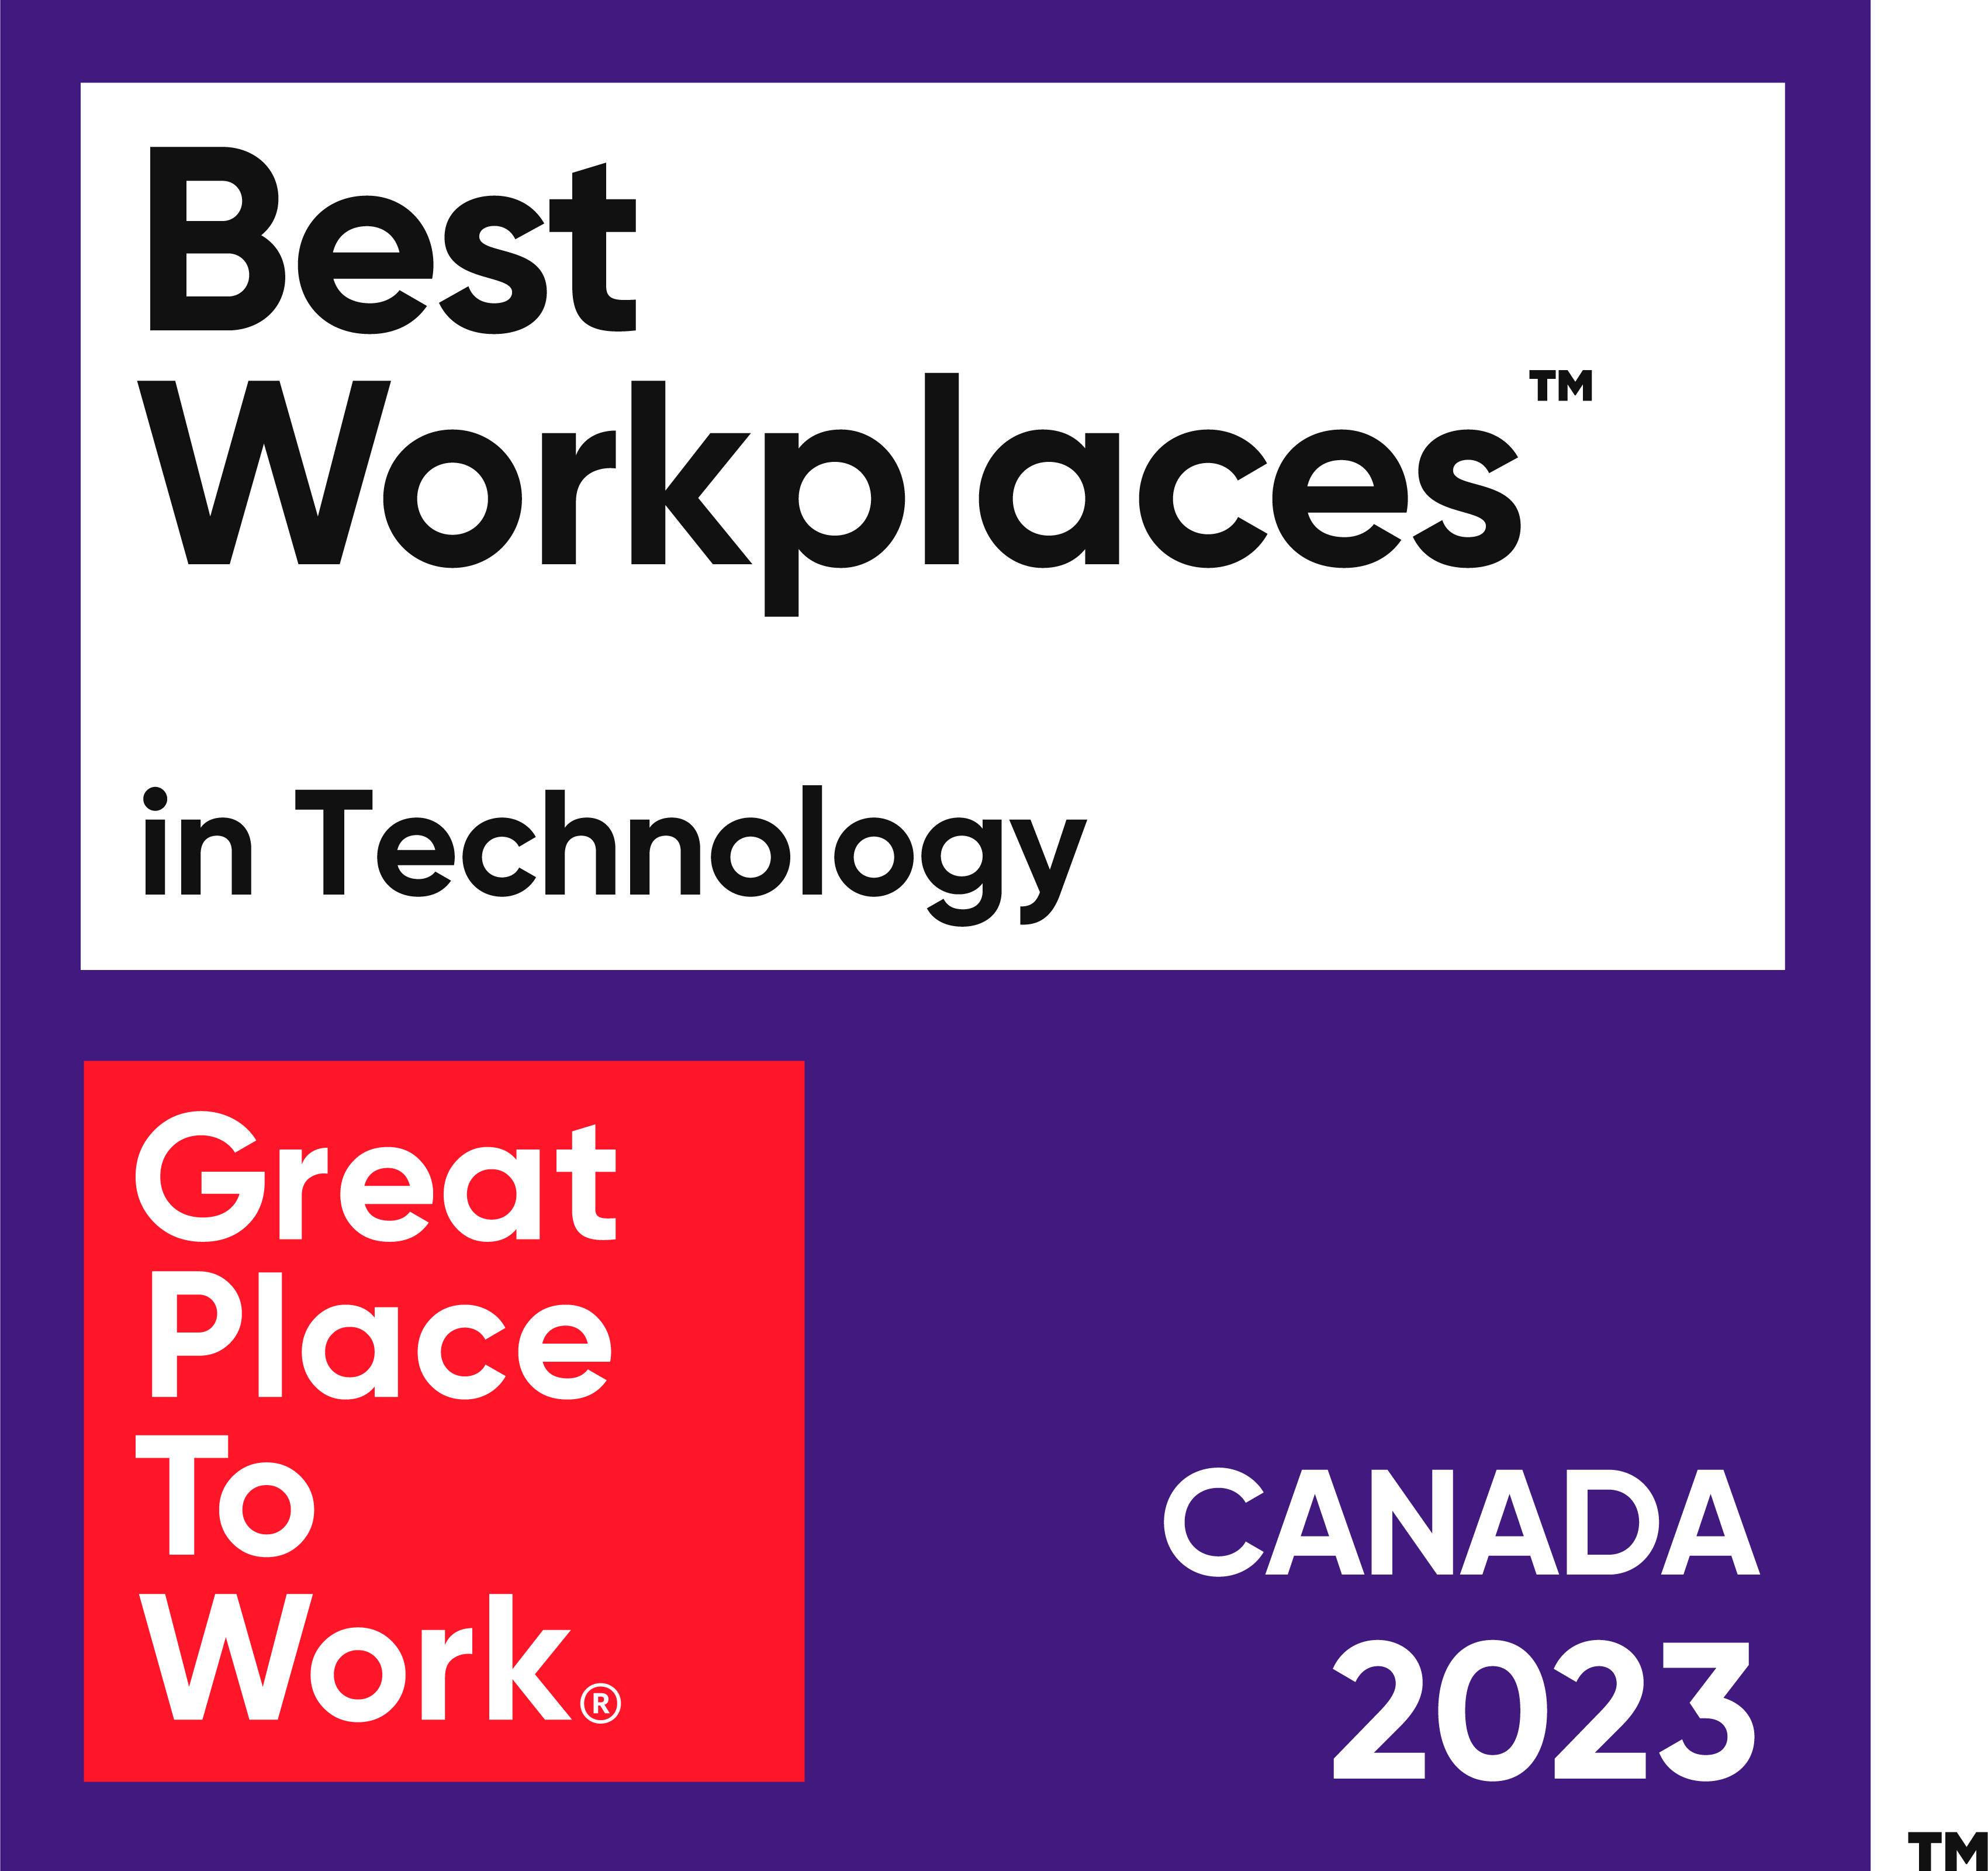 Best Workplaces in Technology